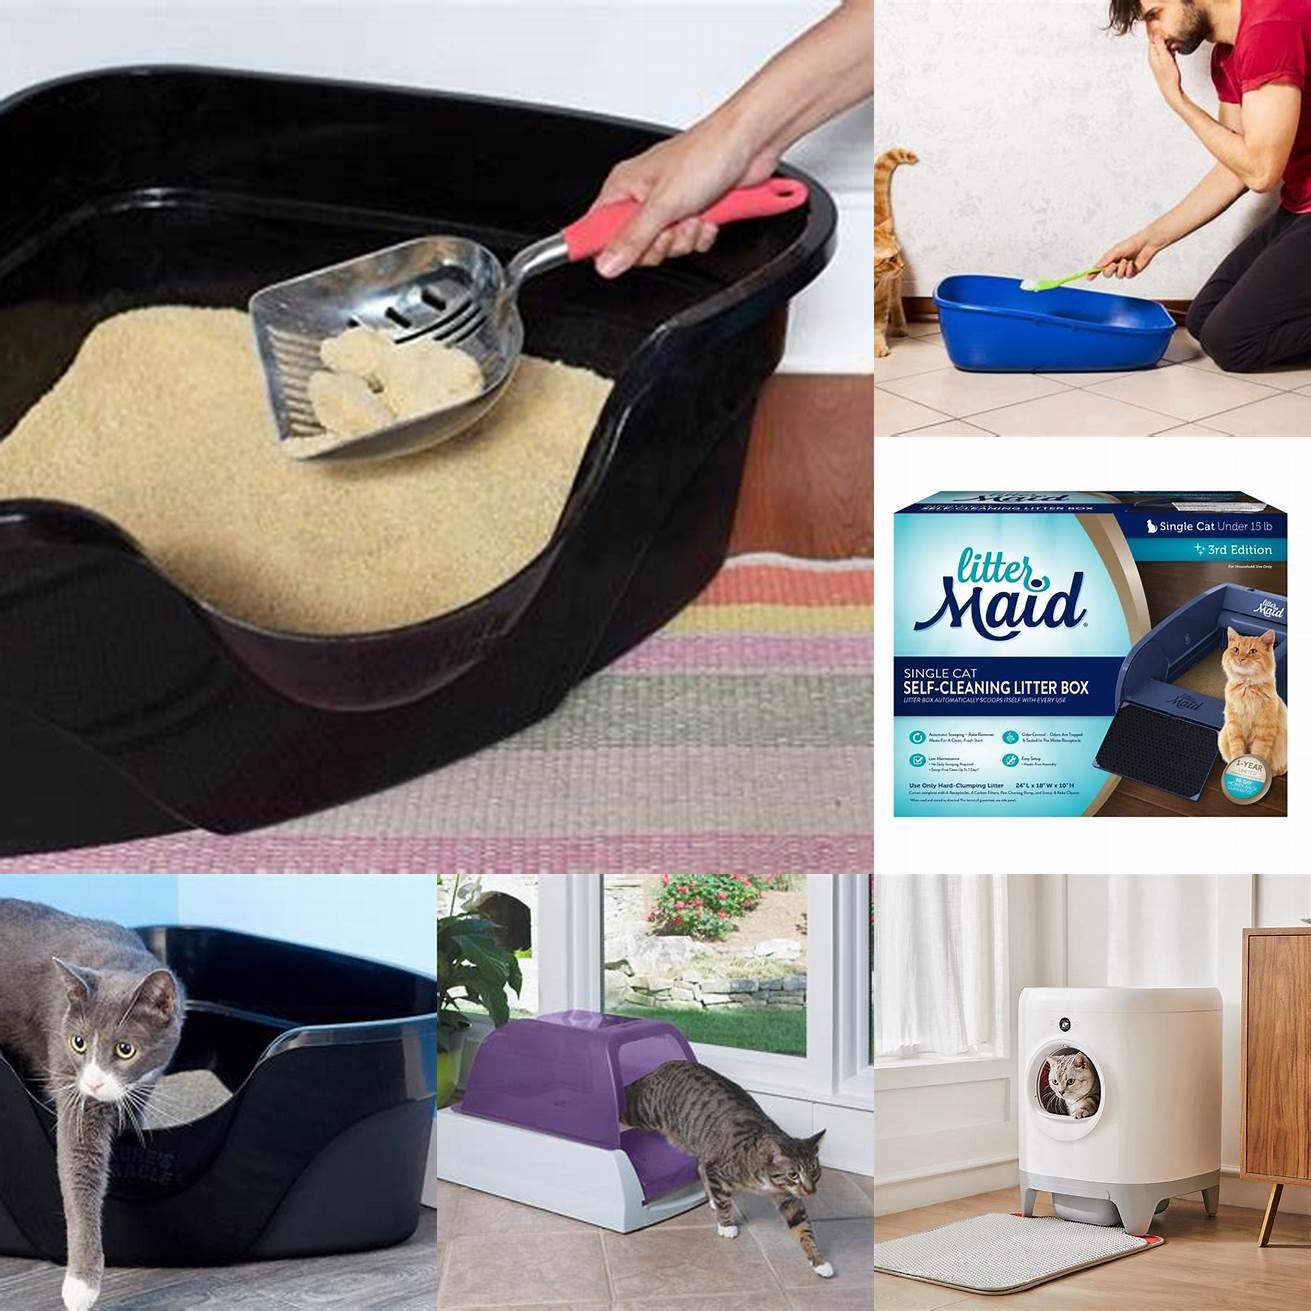 1 Clean the litter box regularly